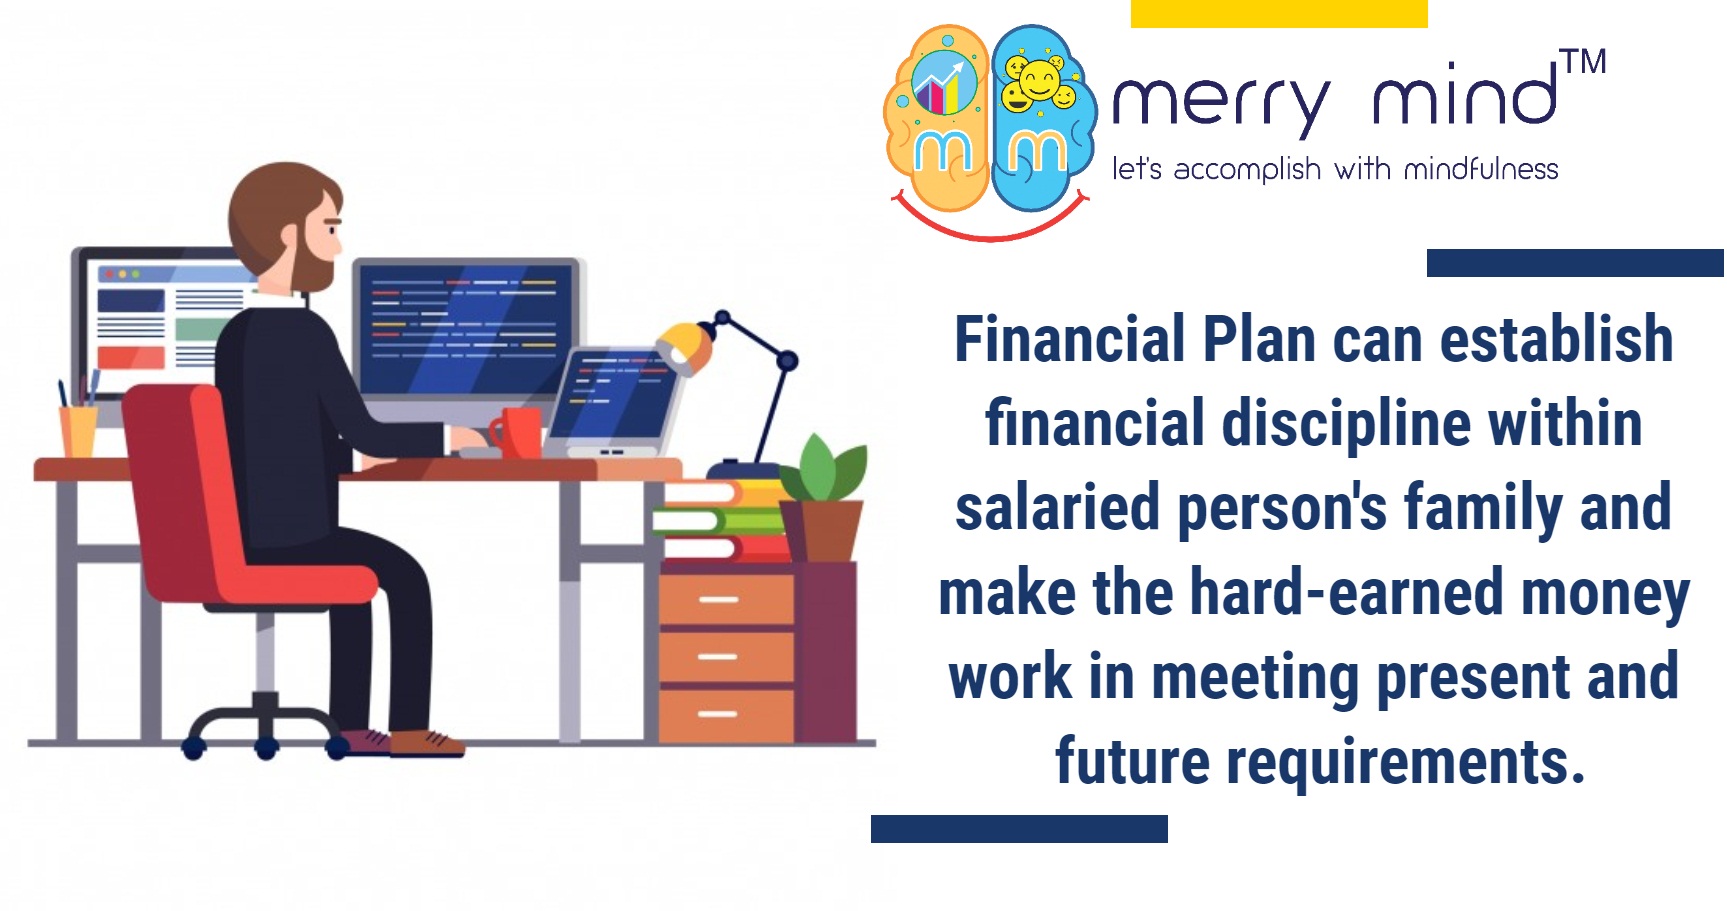 Financial planning for salaried employee is essential to lead a financially disciplined life and rationally achieve financial goals